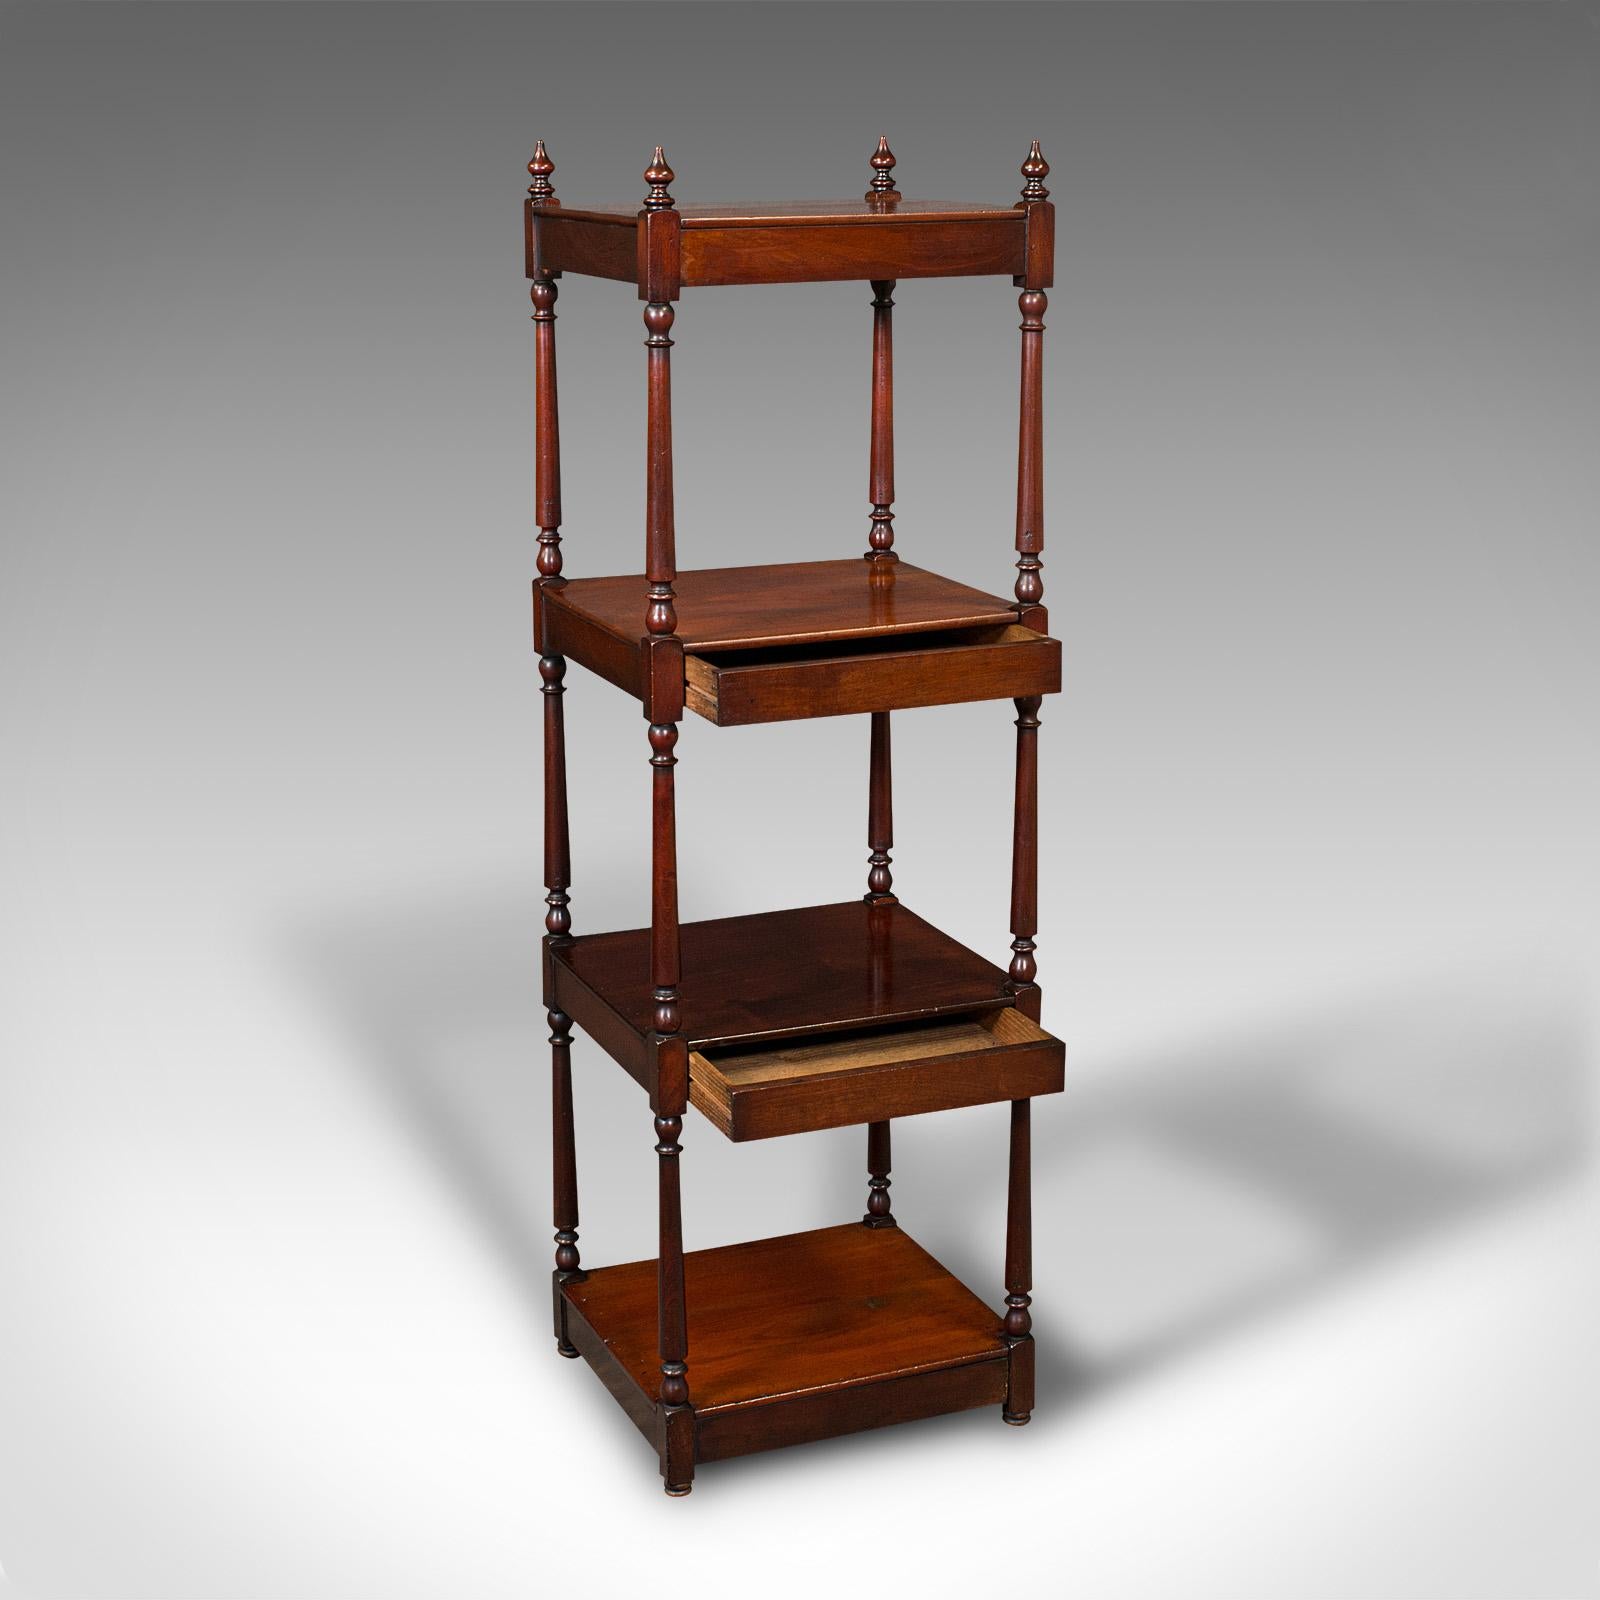 This is an antique display whatnot. An English, mahogany four tier ornament stand, dating to the Regency period, circa 1820.

Attractive example of Regency display furniture
Displays a desirable aged patina and in good order
Select stocks show rich